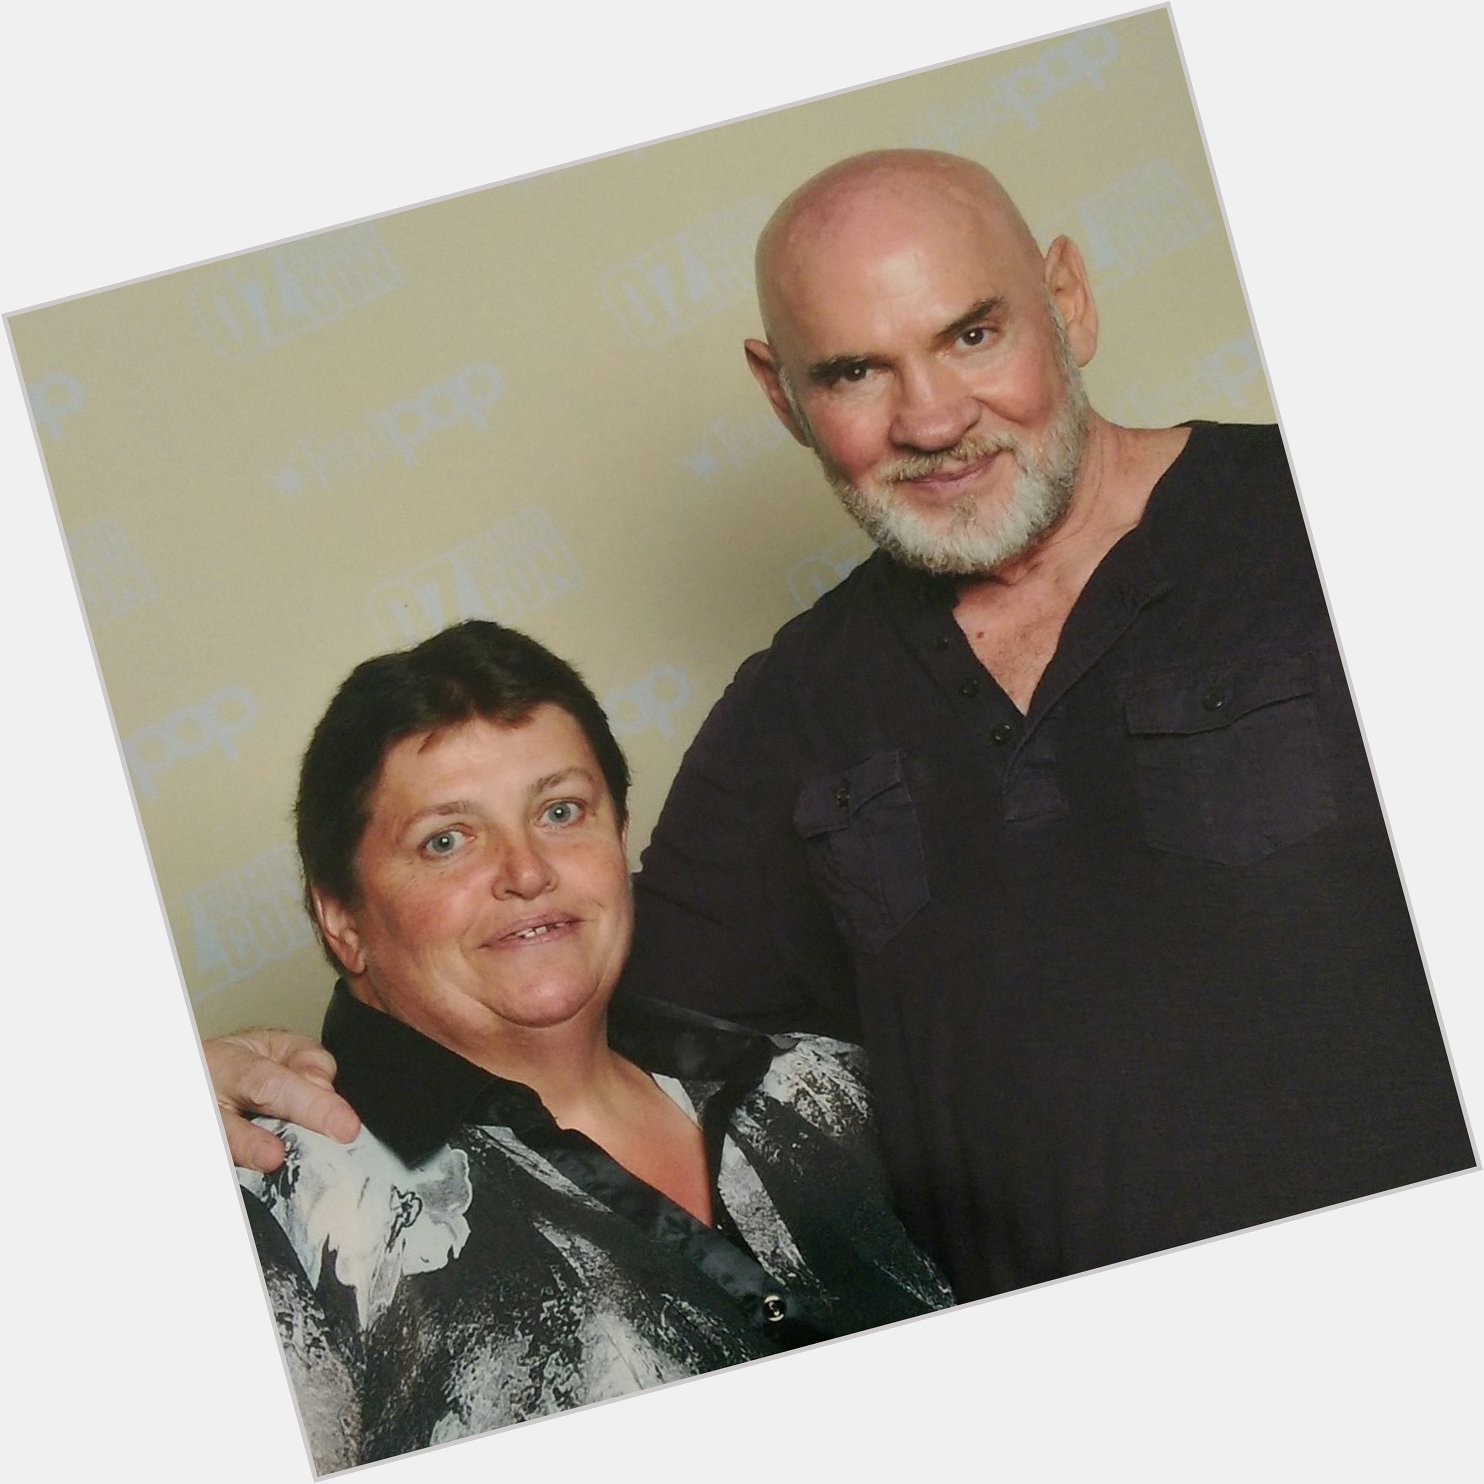 HAPPY BIRTHDAY MITCH PILEGGI  HOPE YOU HAVE AN AWESOME DAY 